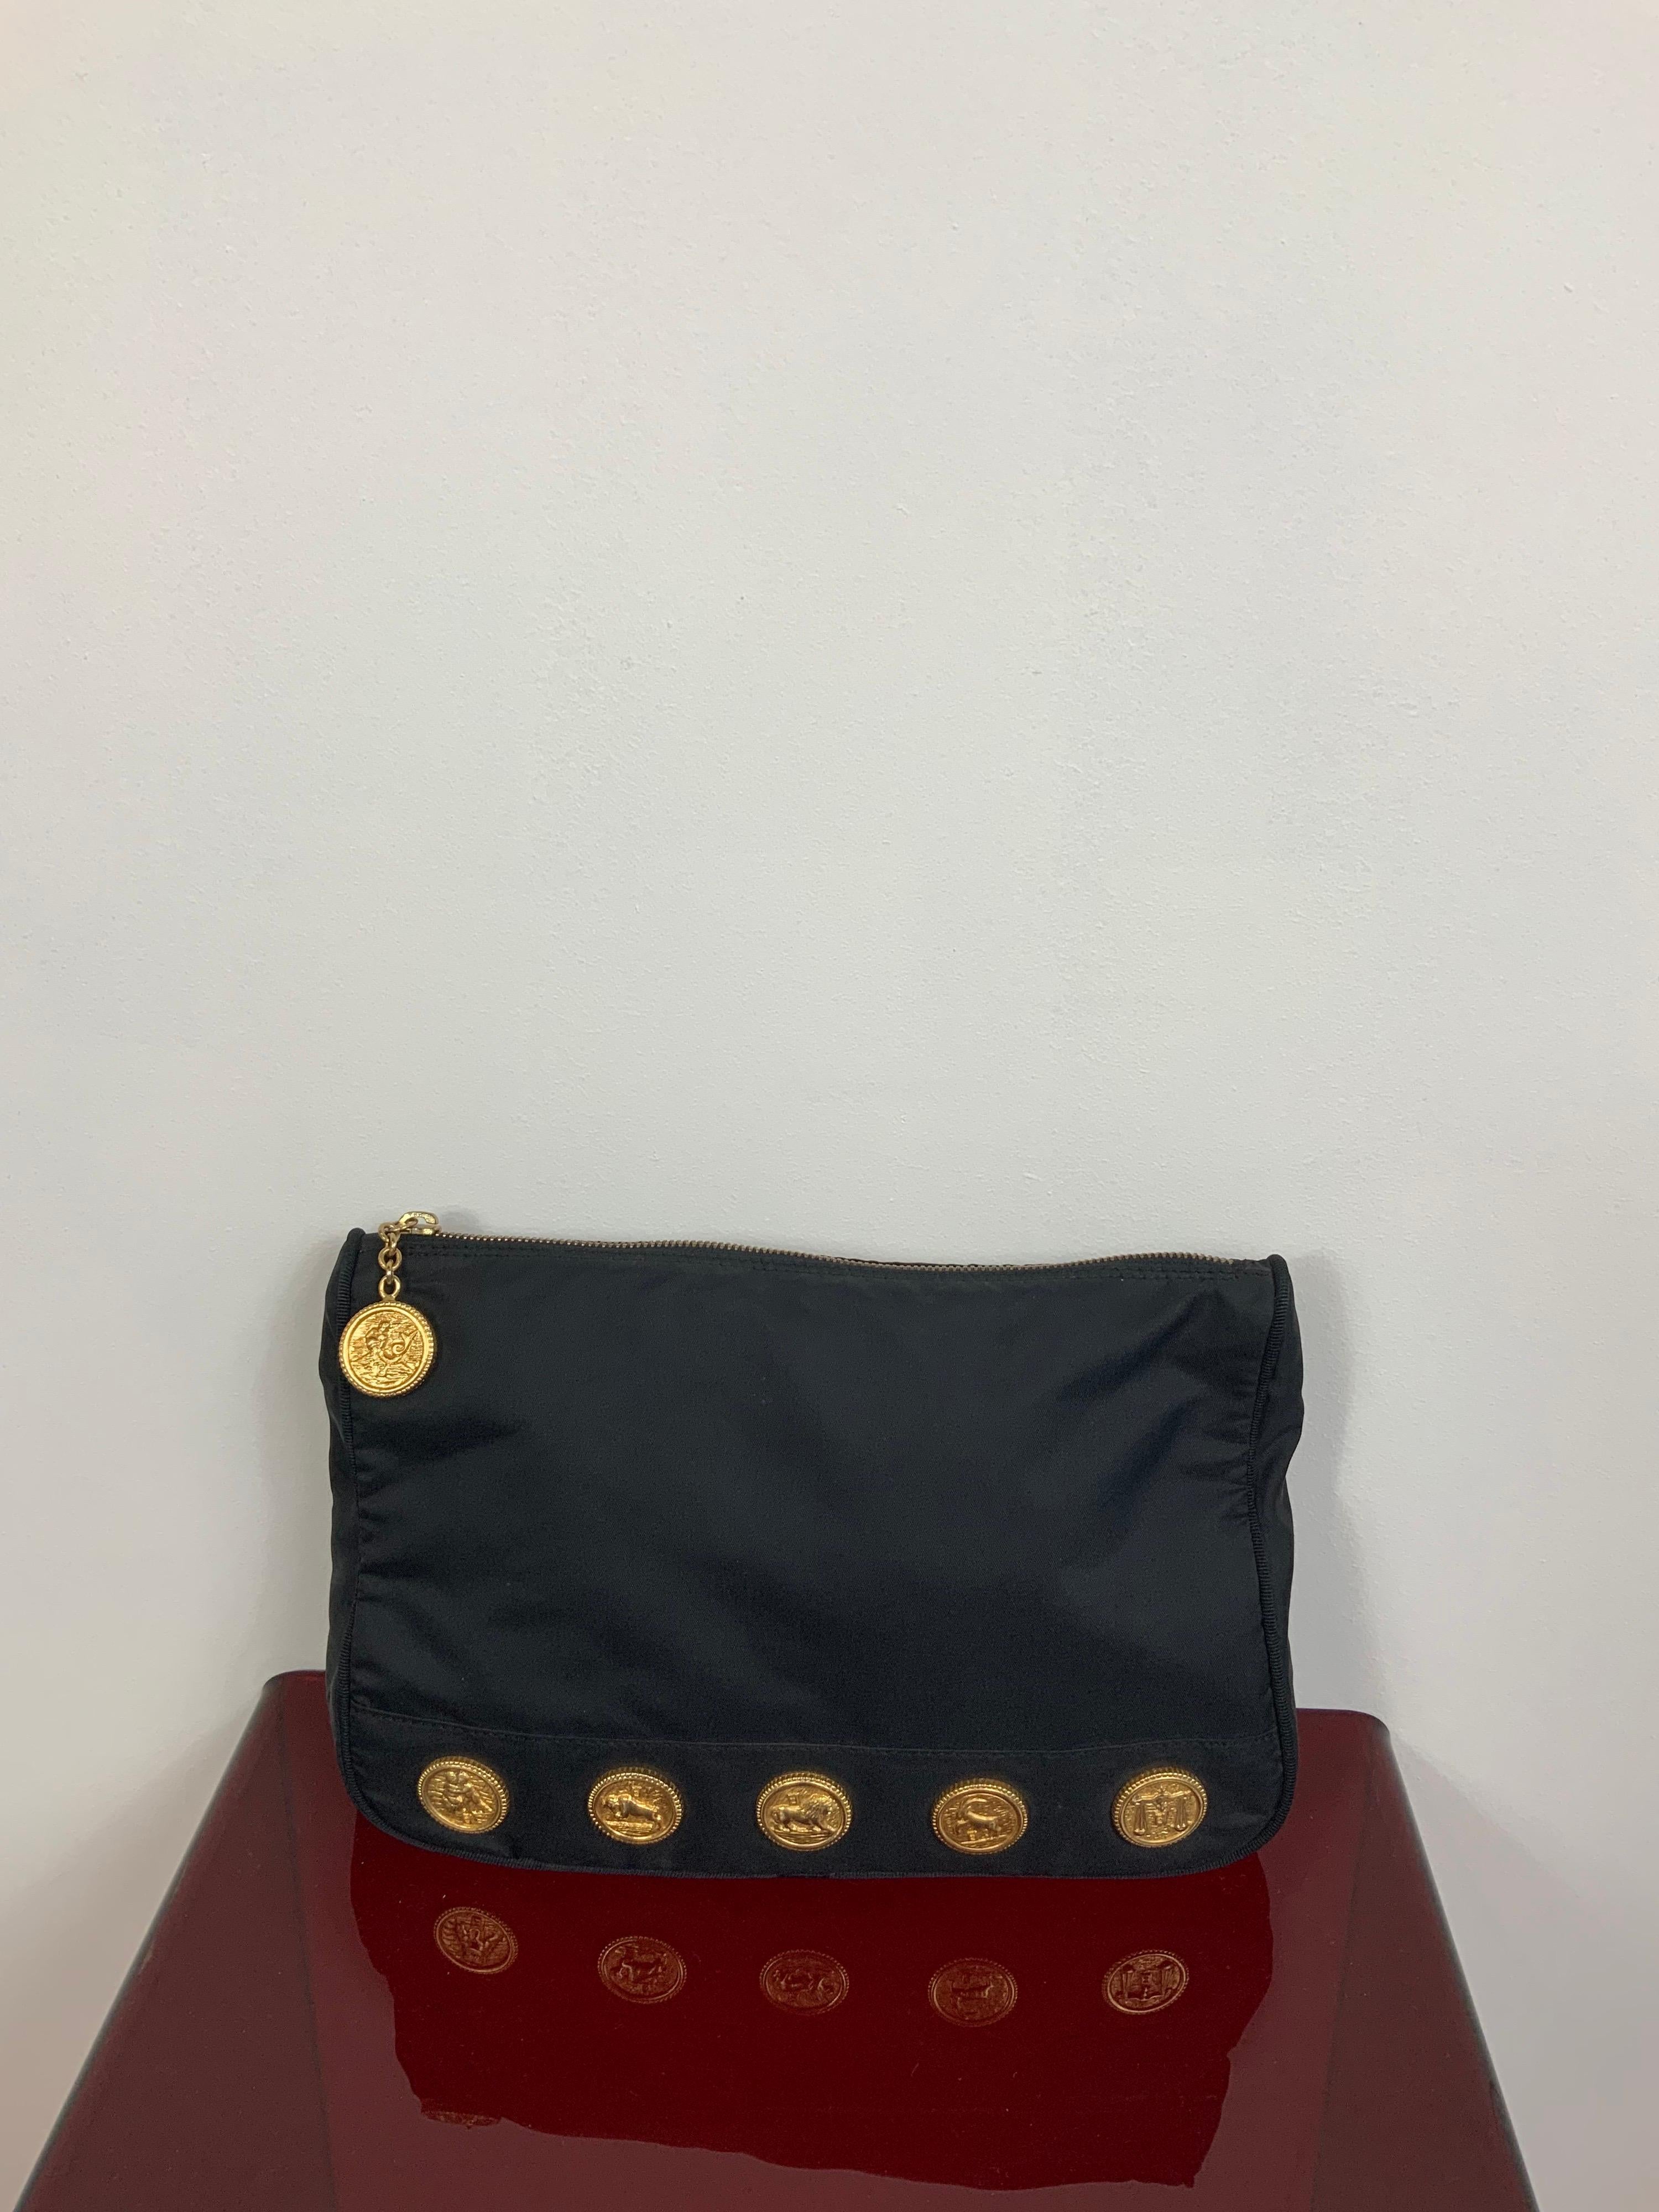 Fendi vintage bag.
Featuring Zodiac gold medallion and black nylon fabric.
Zip Closure. Leather as bag interior. One interior pocket. 
Measurements:
Height 20 cm
Width 30 cm
Depth 5 cm
Conditions: Good - Previously owned and gently worn, with little